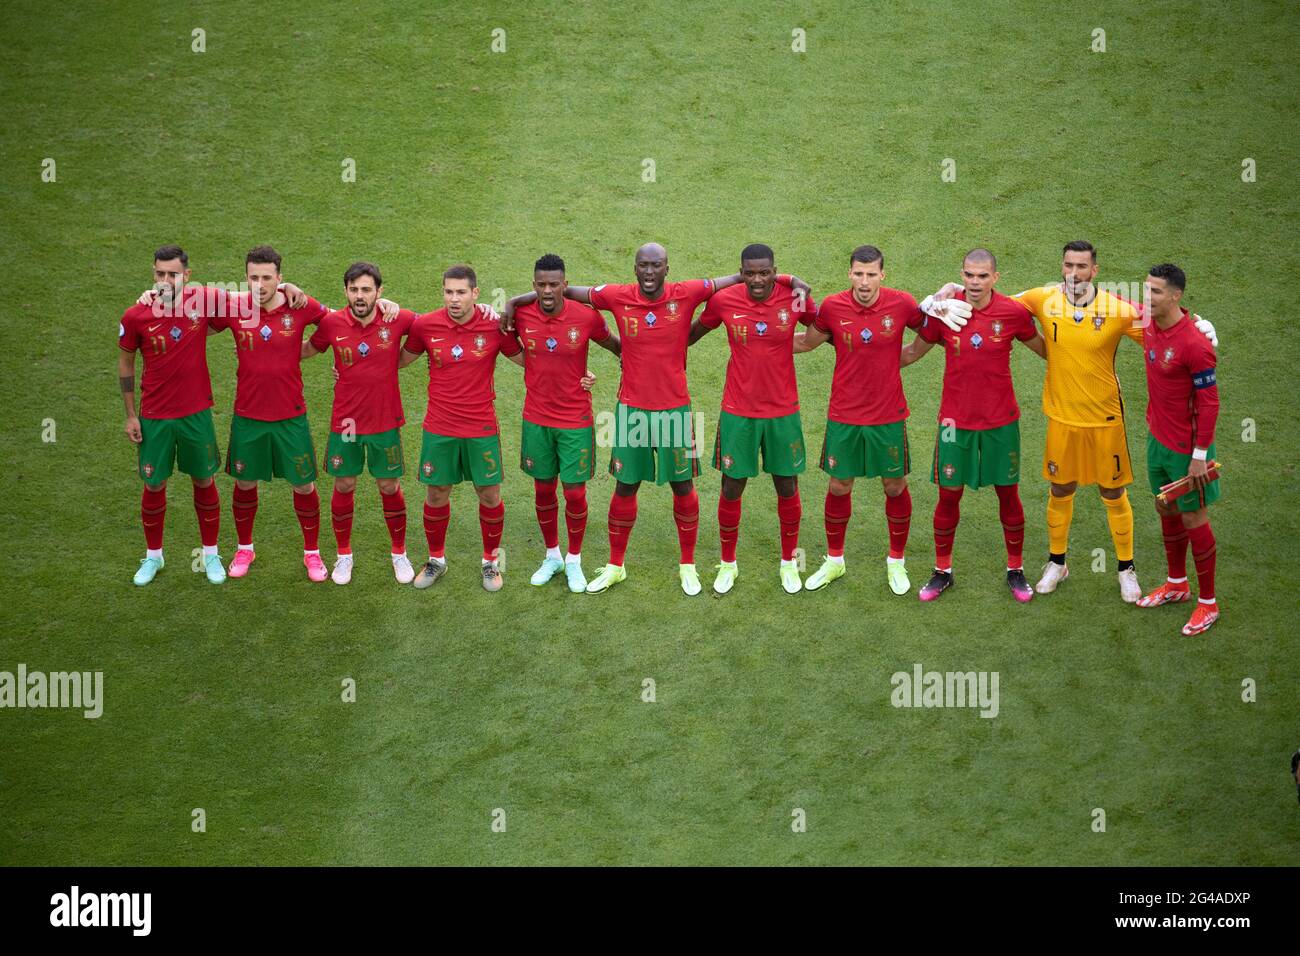 19 June 2021, Bavaria, Munich: Football: European Championship, Portugal - Germany, preliminary round, Group F, 2nd matchday at the EM Arena. Portugal's Bruno Fernandes (l-r), Diogo Jota, Bernardo Silva, Raphael Guerreiro, Nelson Semedo, Danilo Pereira, William Carvalho, Ruben Dias, Pepe, goalkeeper Rui Patricio, and Cristiano Ronaldo before the match. Photo: Federico Gambarini/dpa - IMPORTANT NOTE: In accordance with the regulations of the DFL Deutsche Fußball Liga and/or the DFB Deutscher Fußball-Bund, it is prohibited to use or have used photographs taken in the stadium and/or of the match Stock Photo